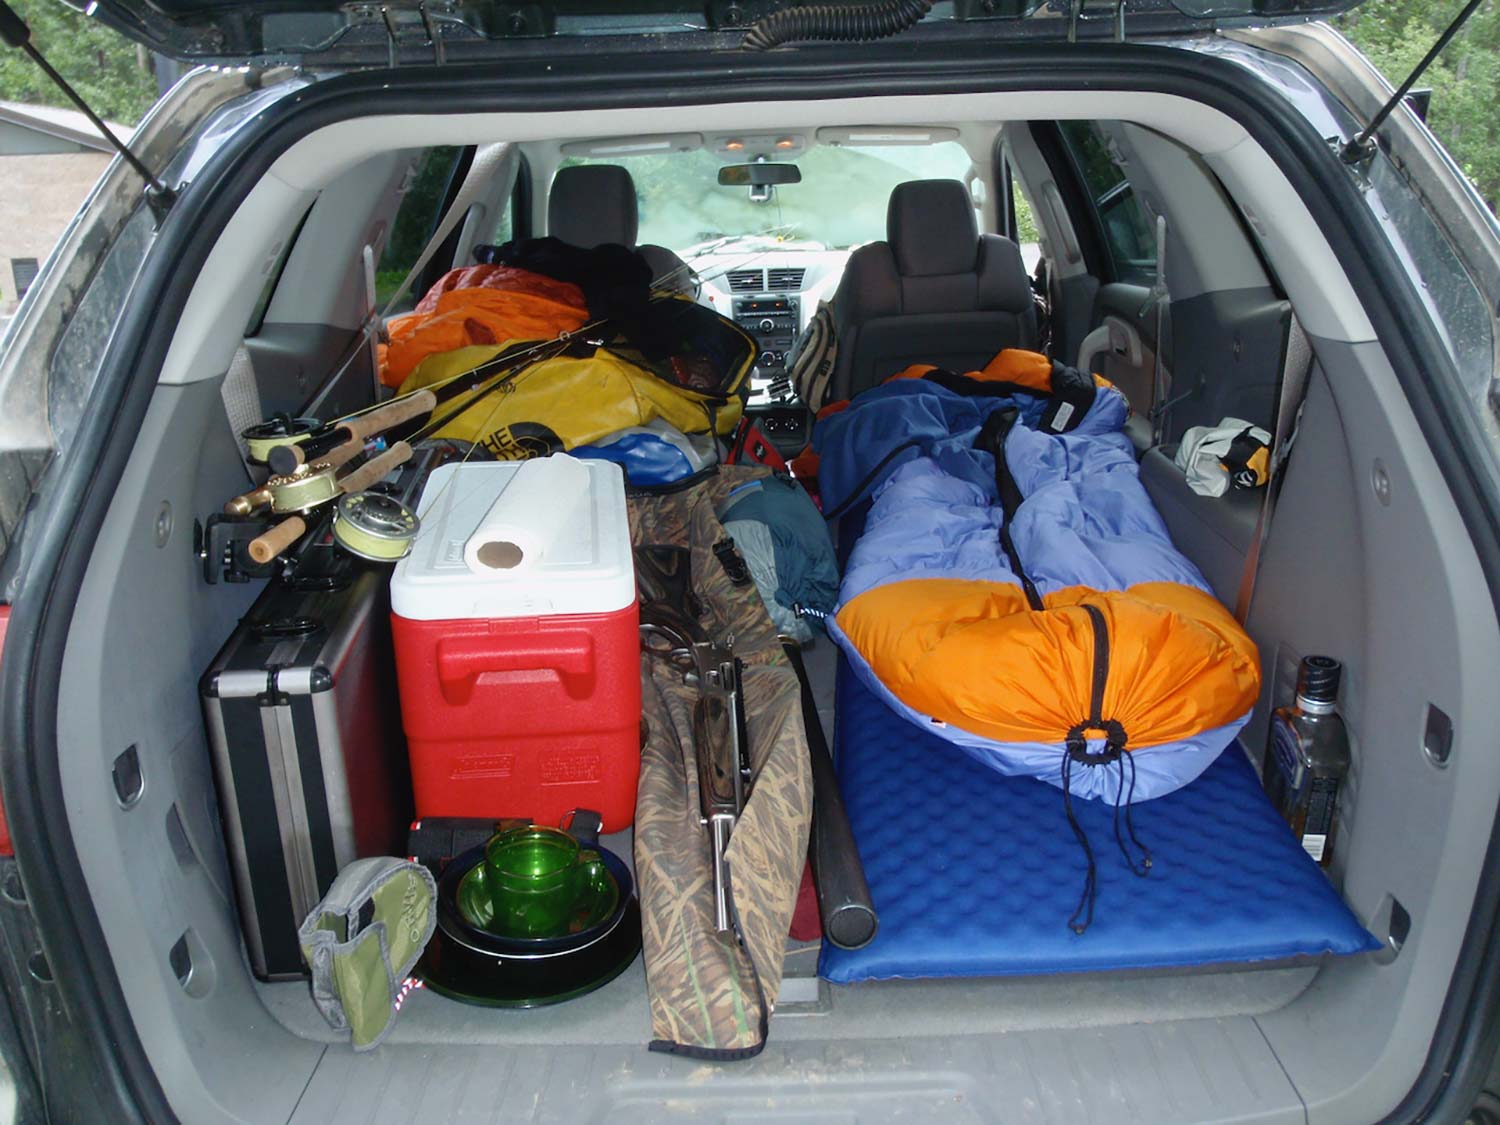 Piles of hunting and camping gear packed into the back of a hunting vehicle.